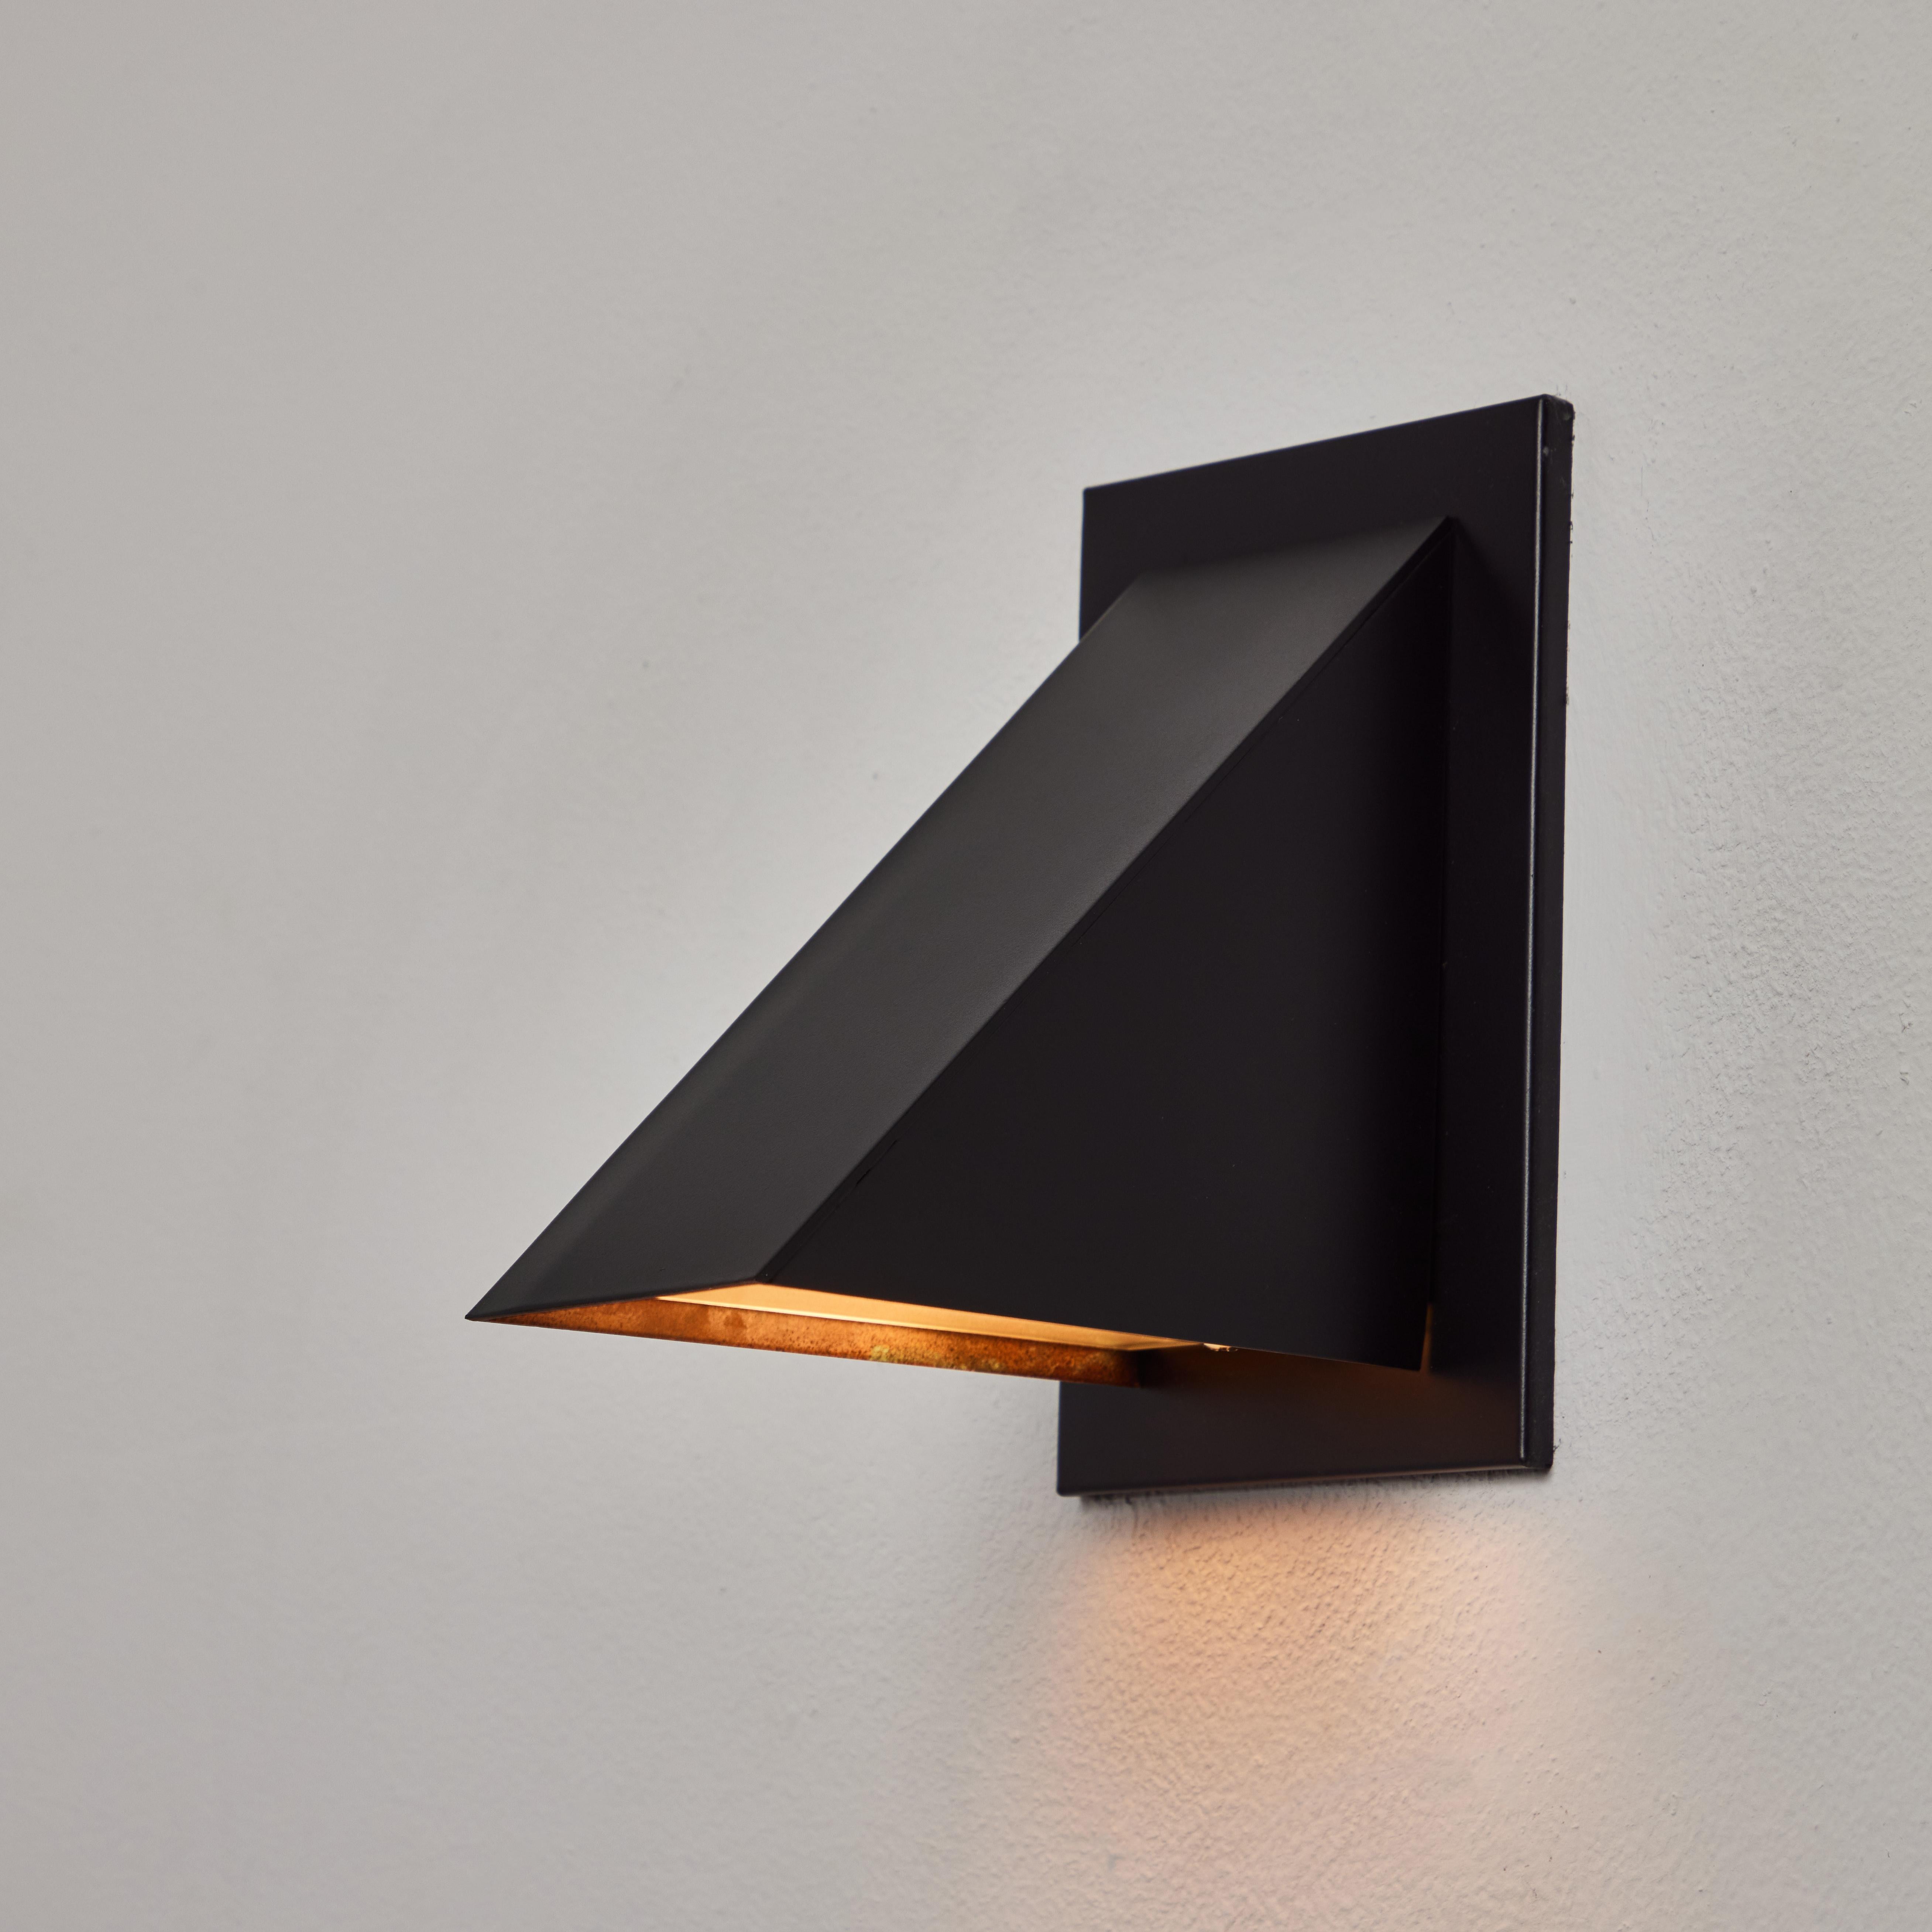 Pair of Jonas Bohlin 'Oxid' Wall Lights for Örsjö in Black. Executed in black painted metal with an opaline glass diffuser. An incredibly refined and clean geometric design that is quintessentially Scandinavian. For indoor or outdoor use.

Price is